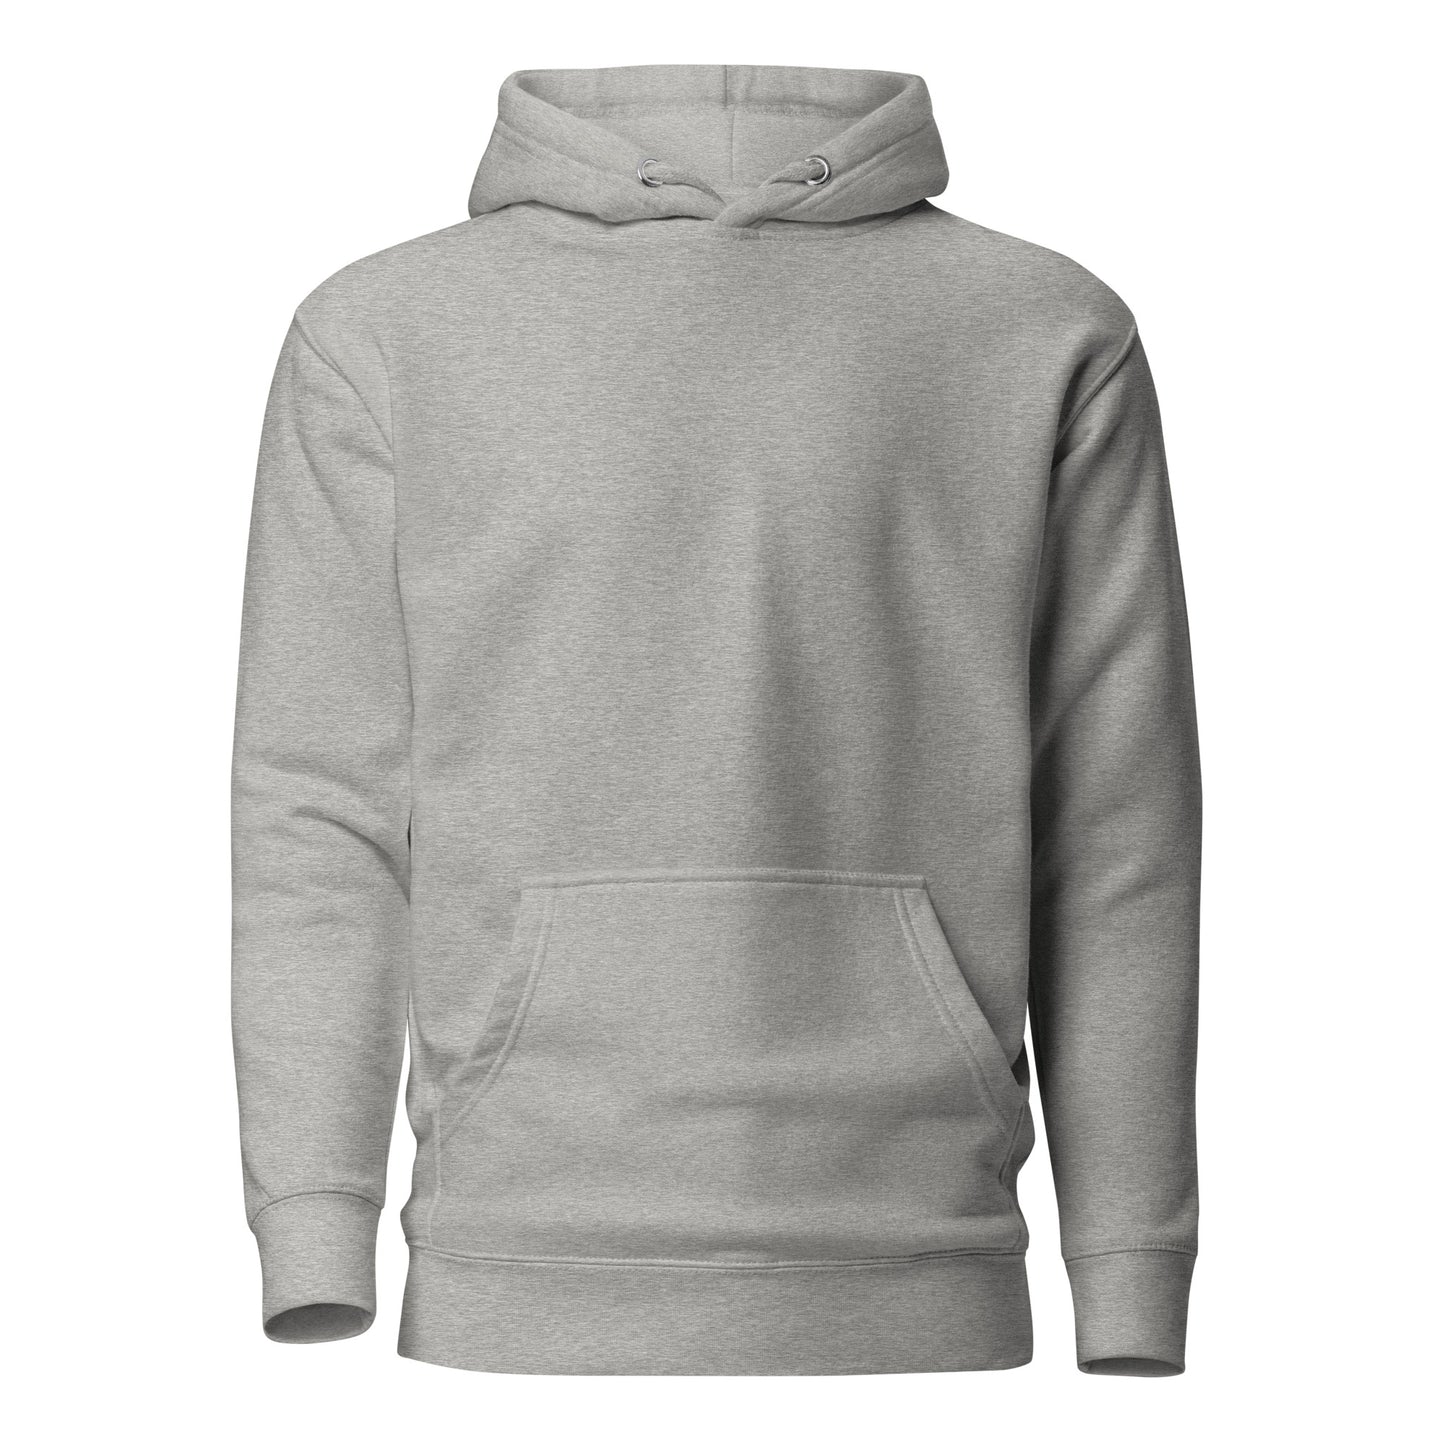 Kindness Can Change the World Quality Cotton Heritage Adult Hoodie